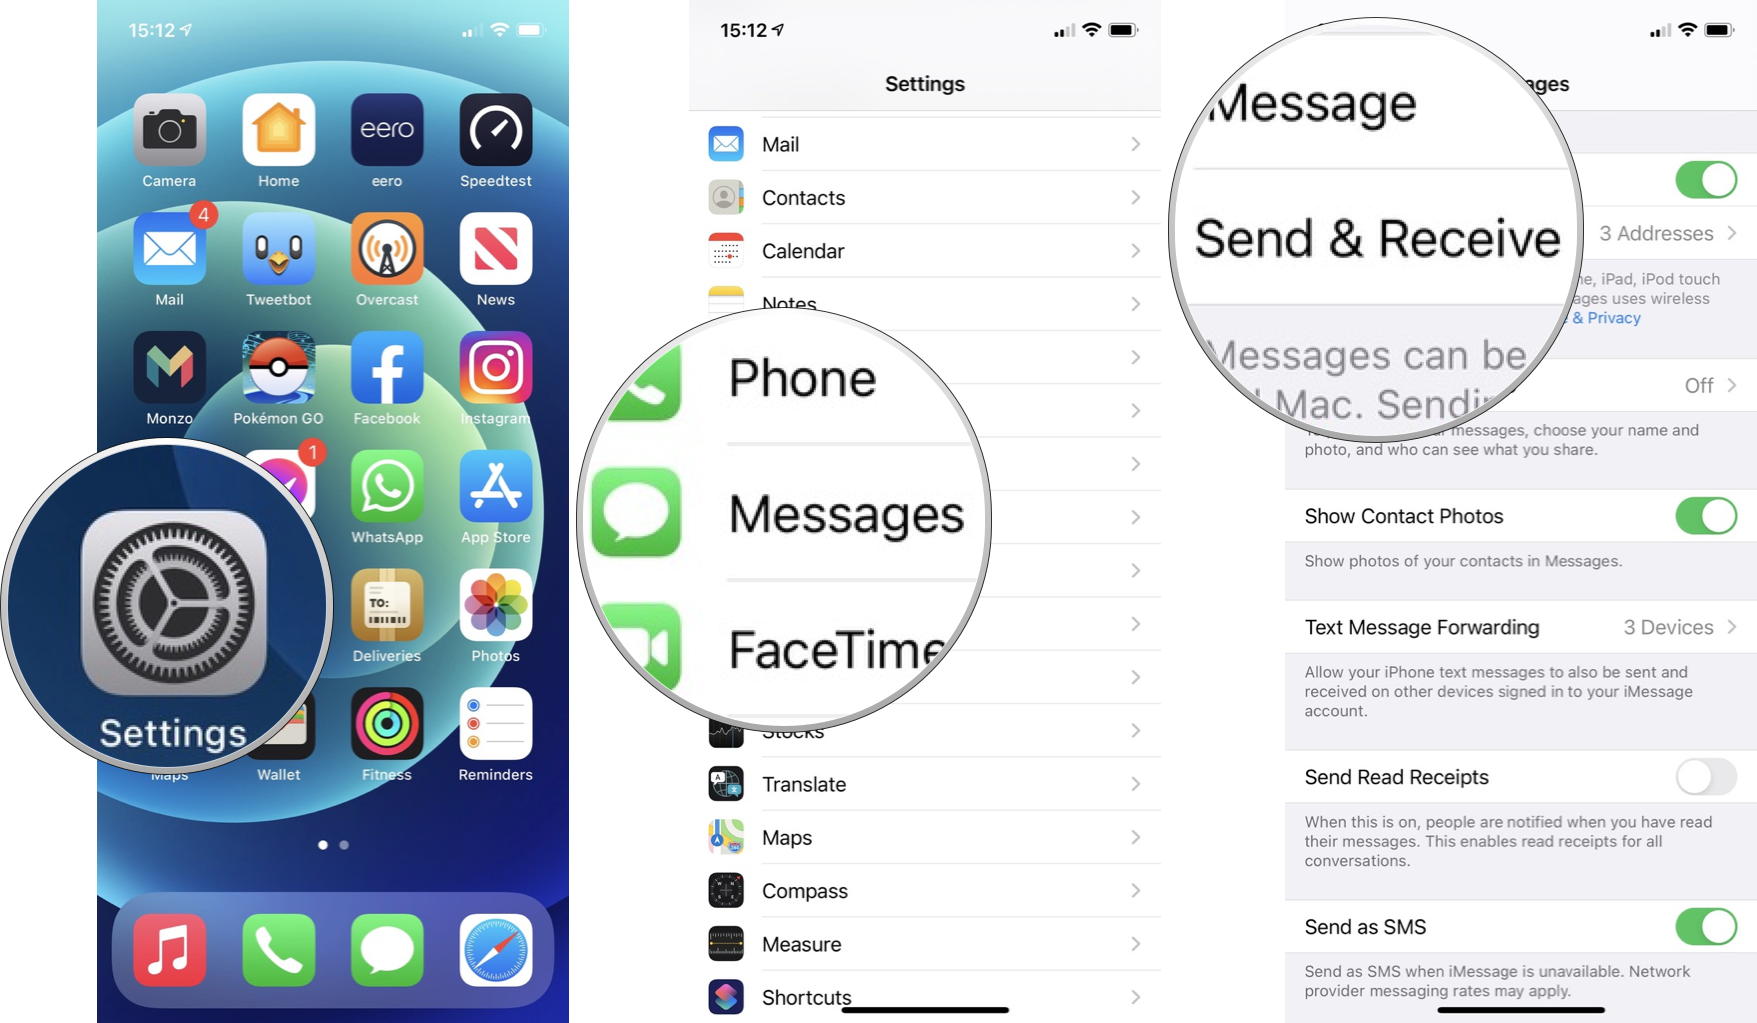 Deregister your phone number with iMessage: Launch Settings, tap Messages, tap Send and Receive